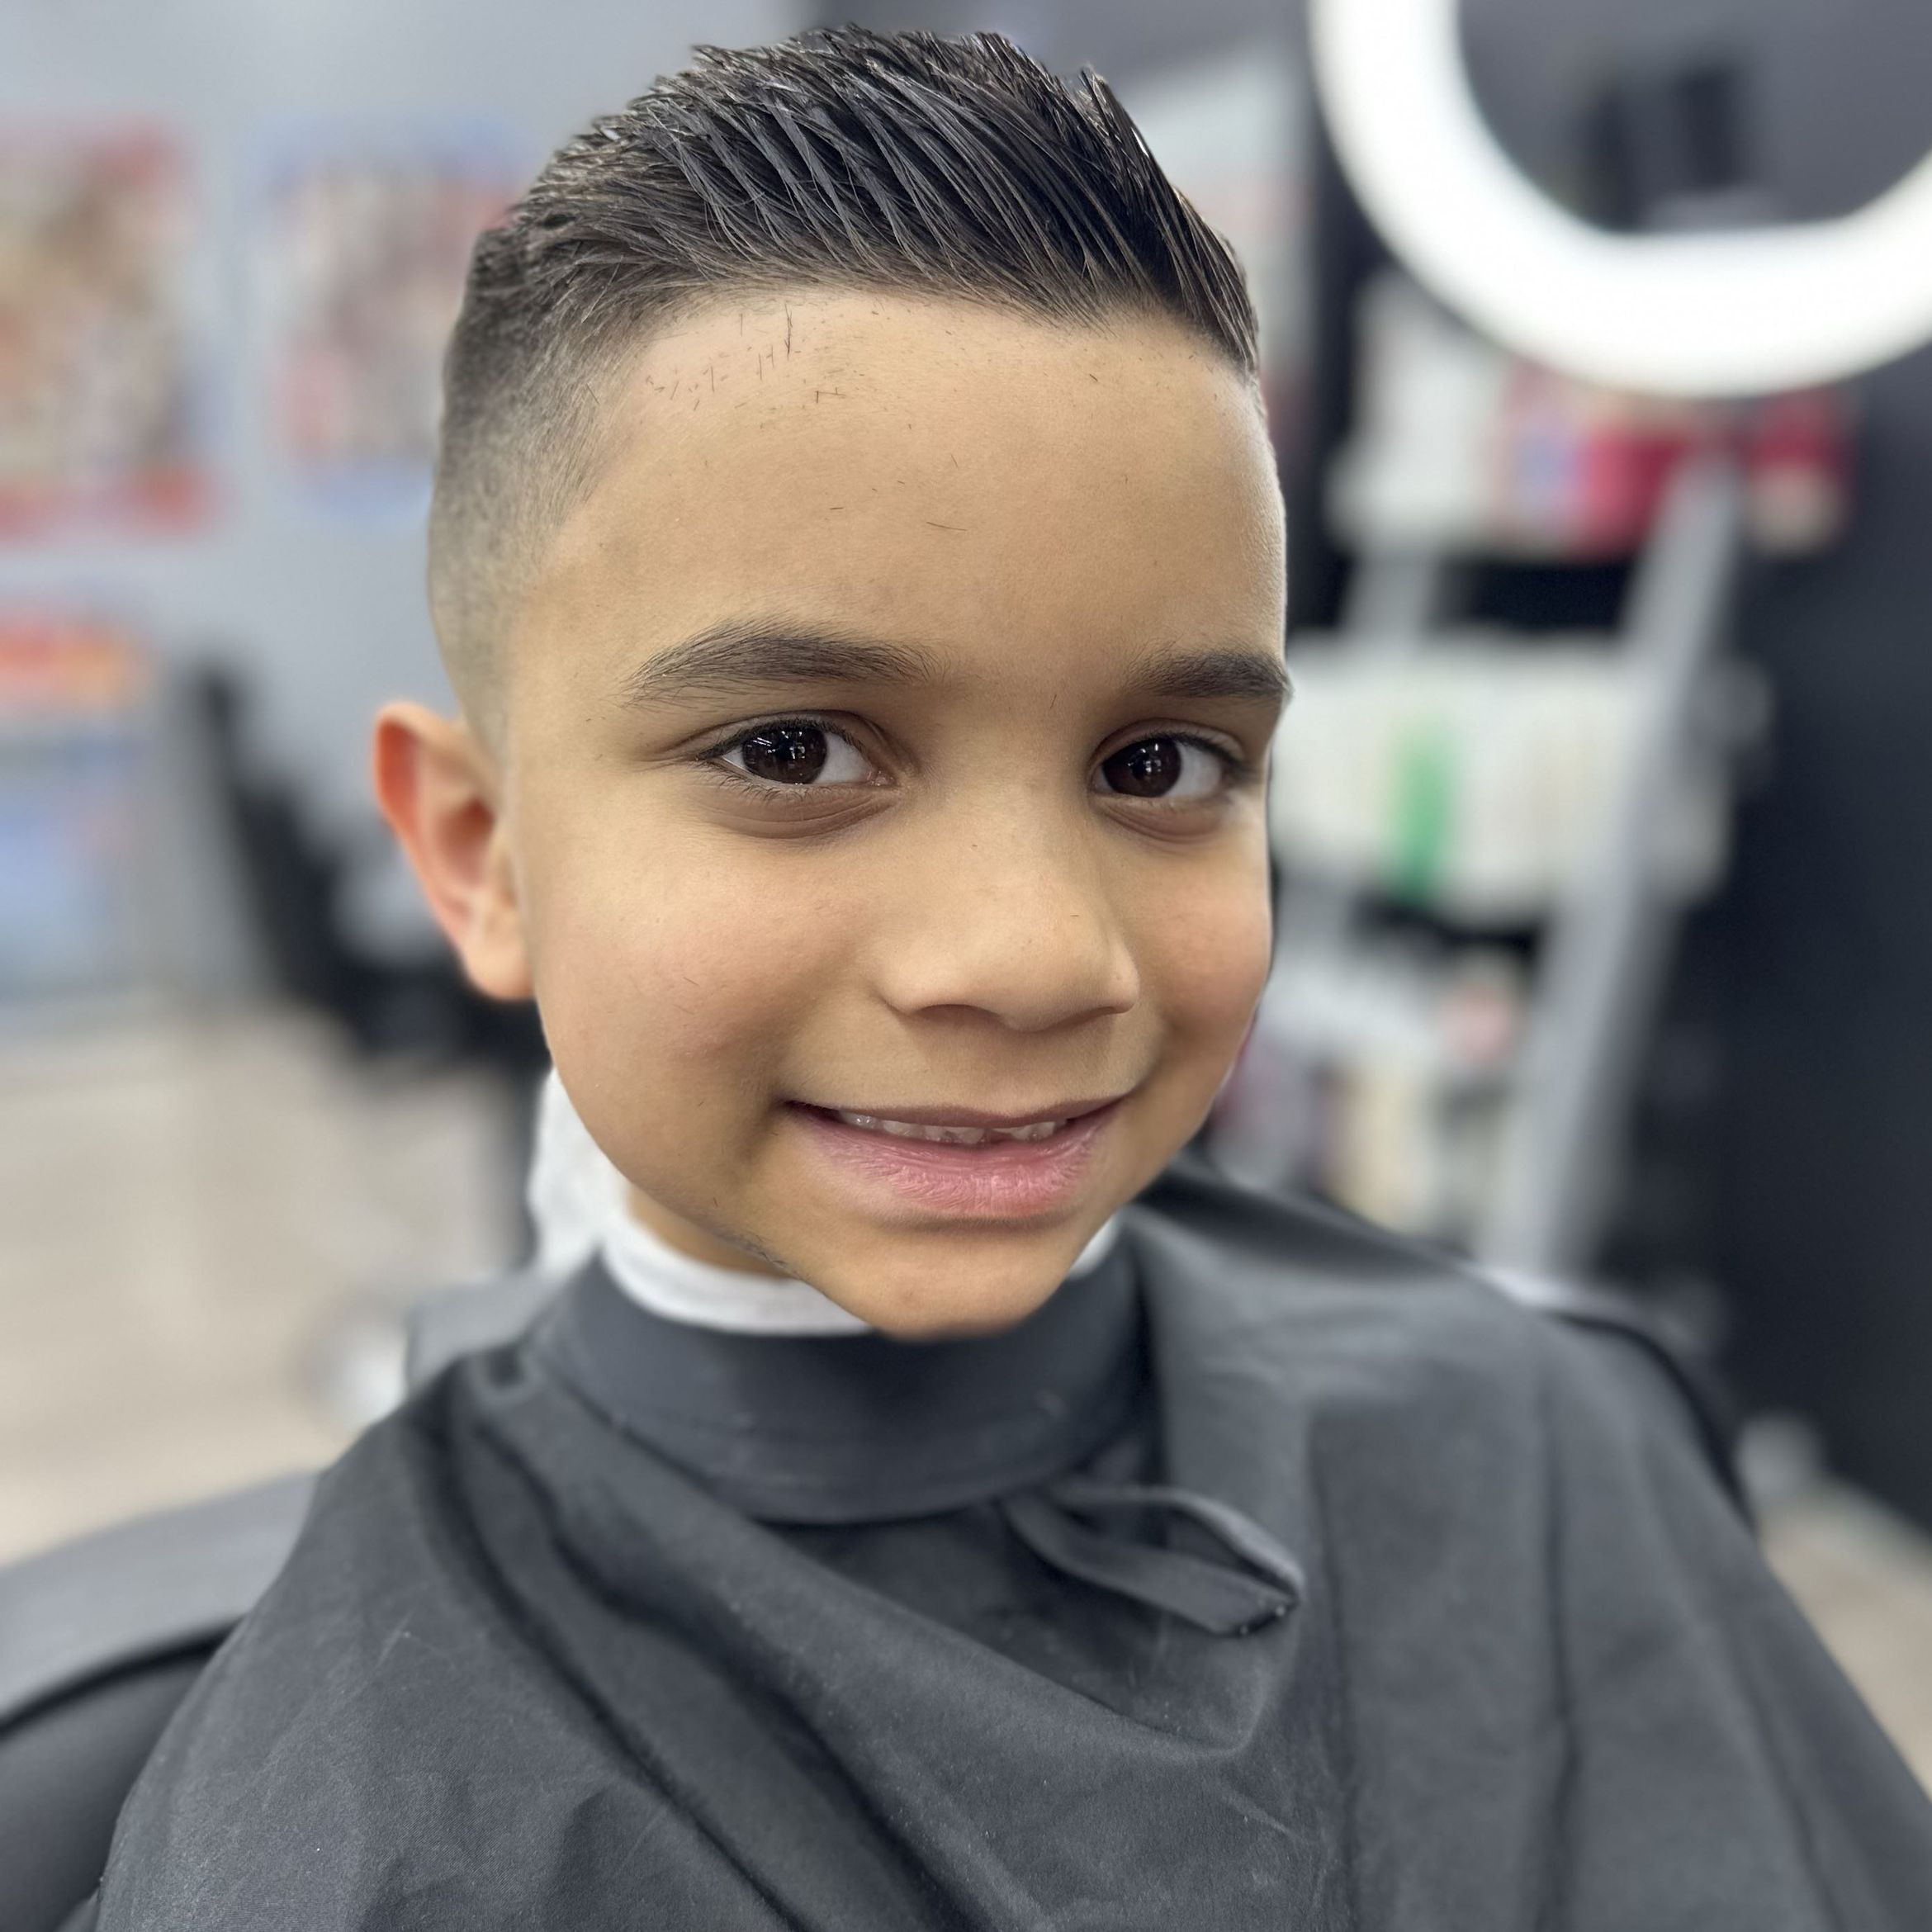 Kids haircut from 10 years or more portfolio